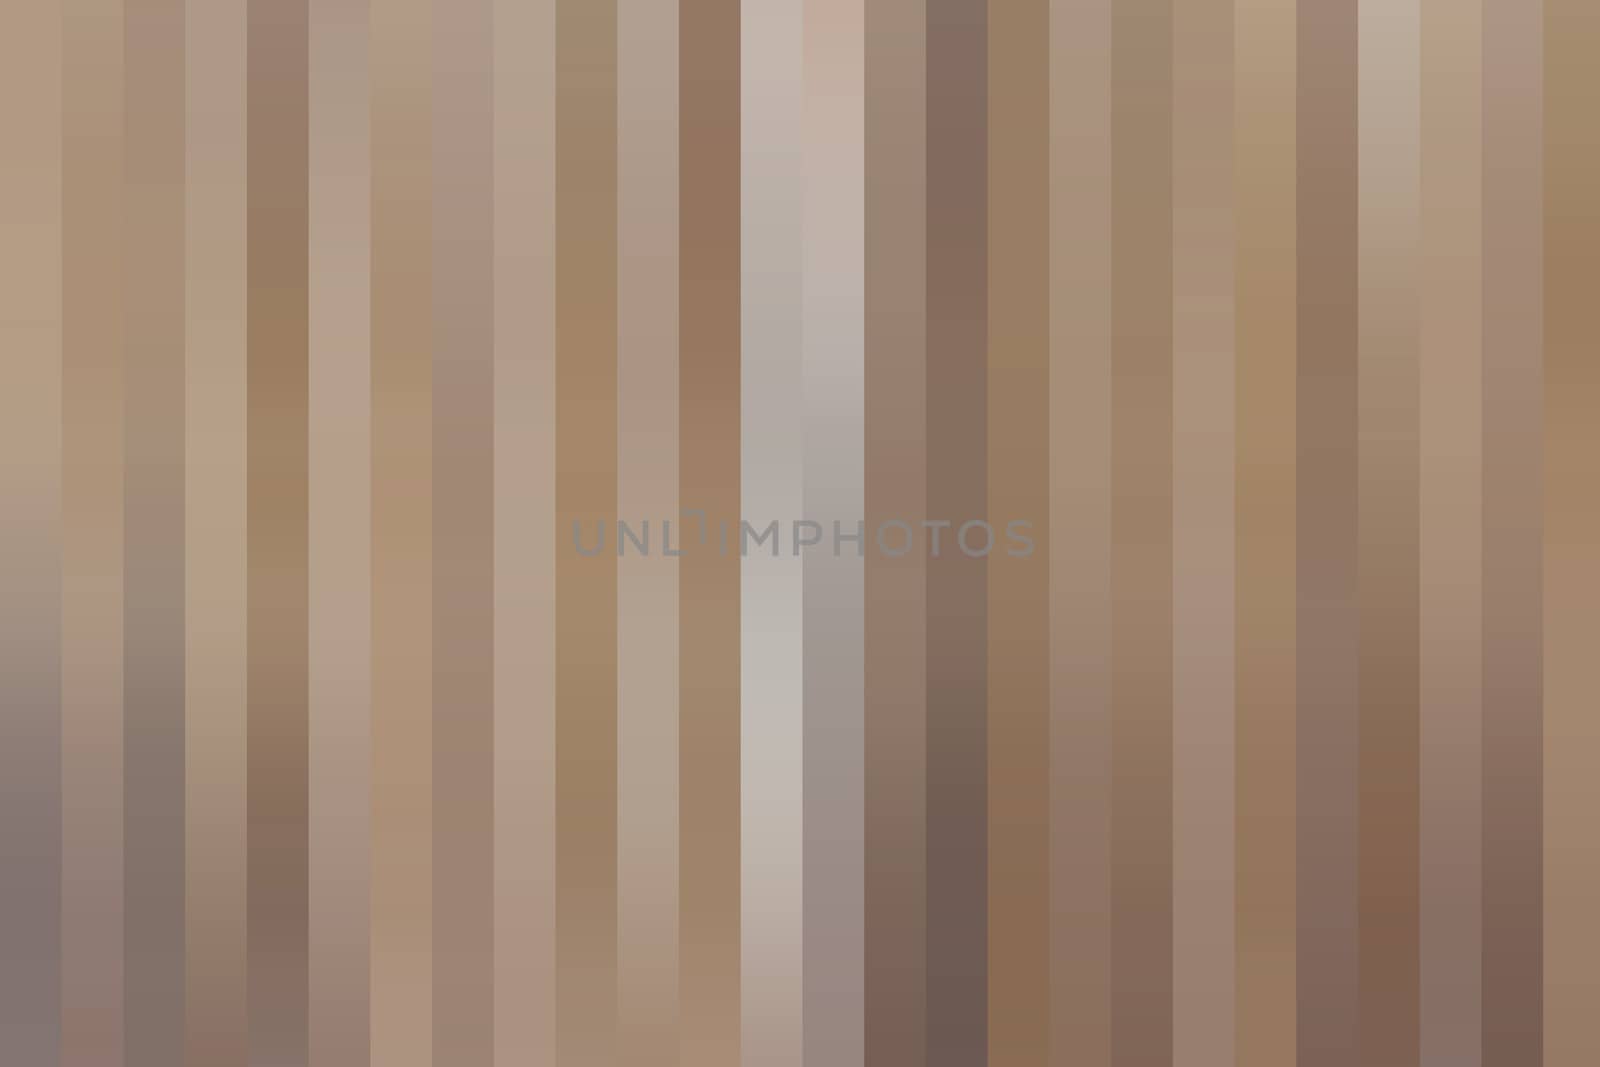 Abstract striped background abstract vertical